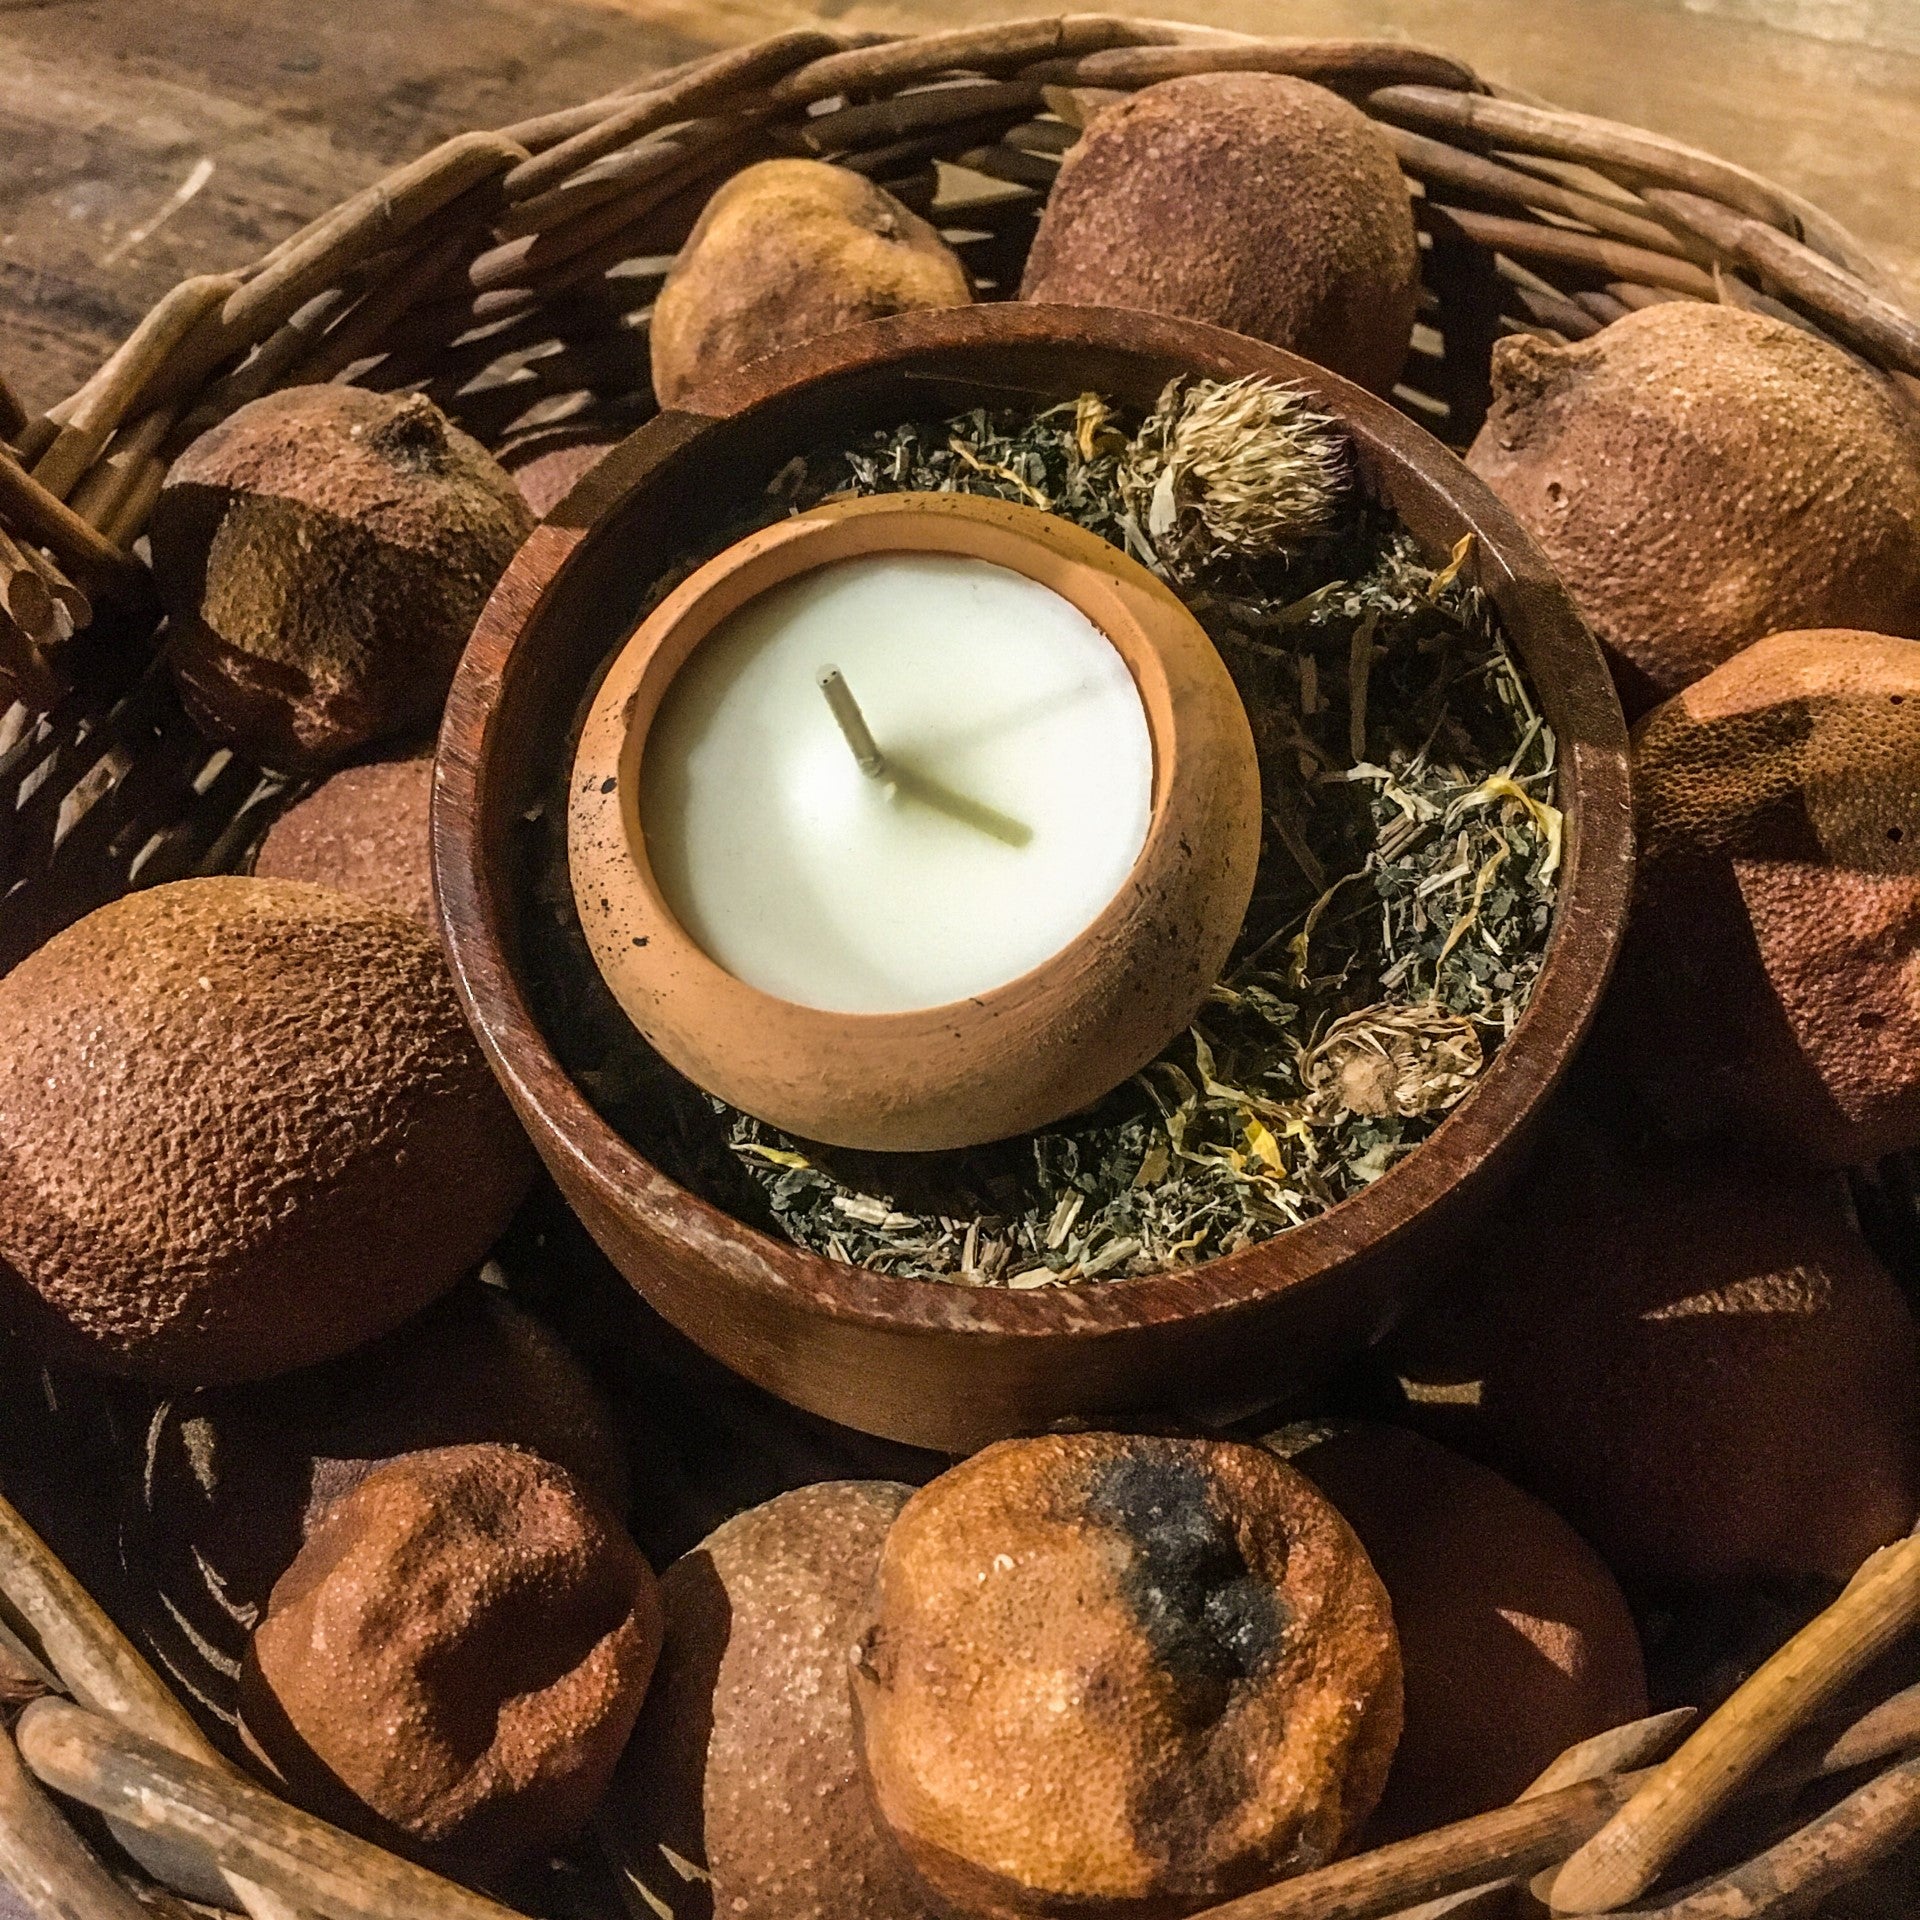 A terracotta candle placed within a wooden bowl of herbs, which sits on a wicker basket of dried fruit